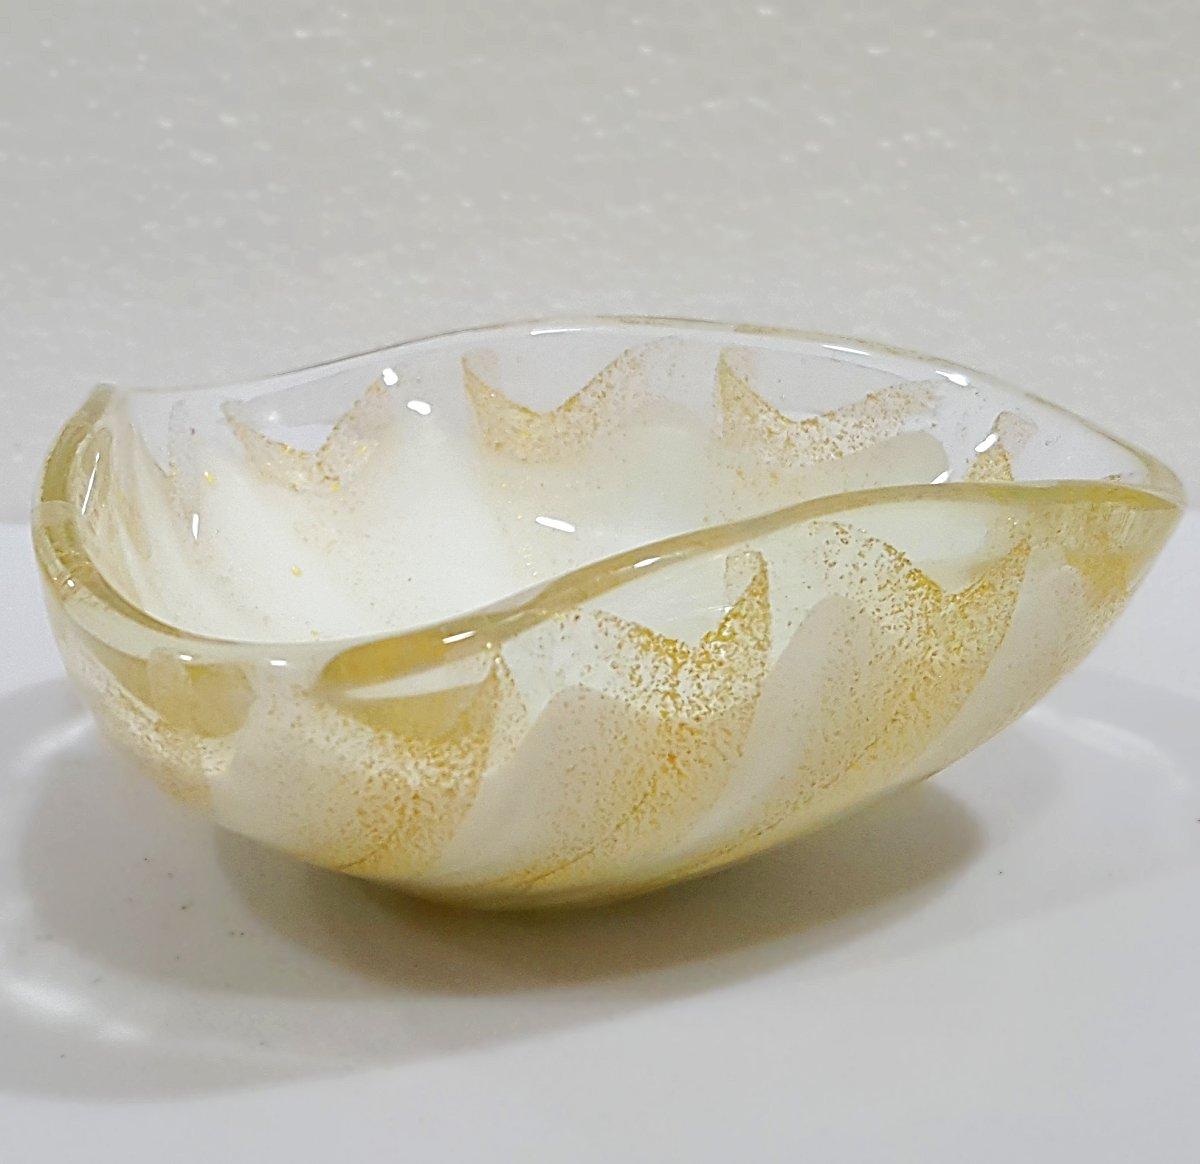 Alfredo Barbini Murano Glass Bowl, Lattimo with Gold Polveri - vintage
 Nice vintage condition. We found no chips or cracks. 
This little Murano glass bowl by master glass artist Alfredo Barbini is in great vintage condition.  It measures about 4